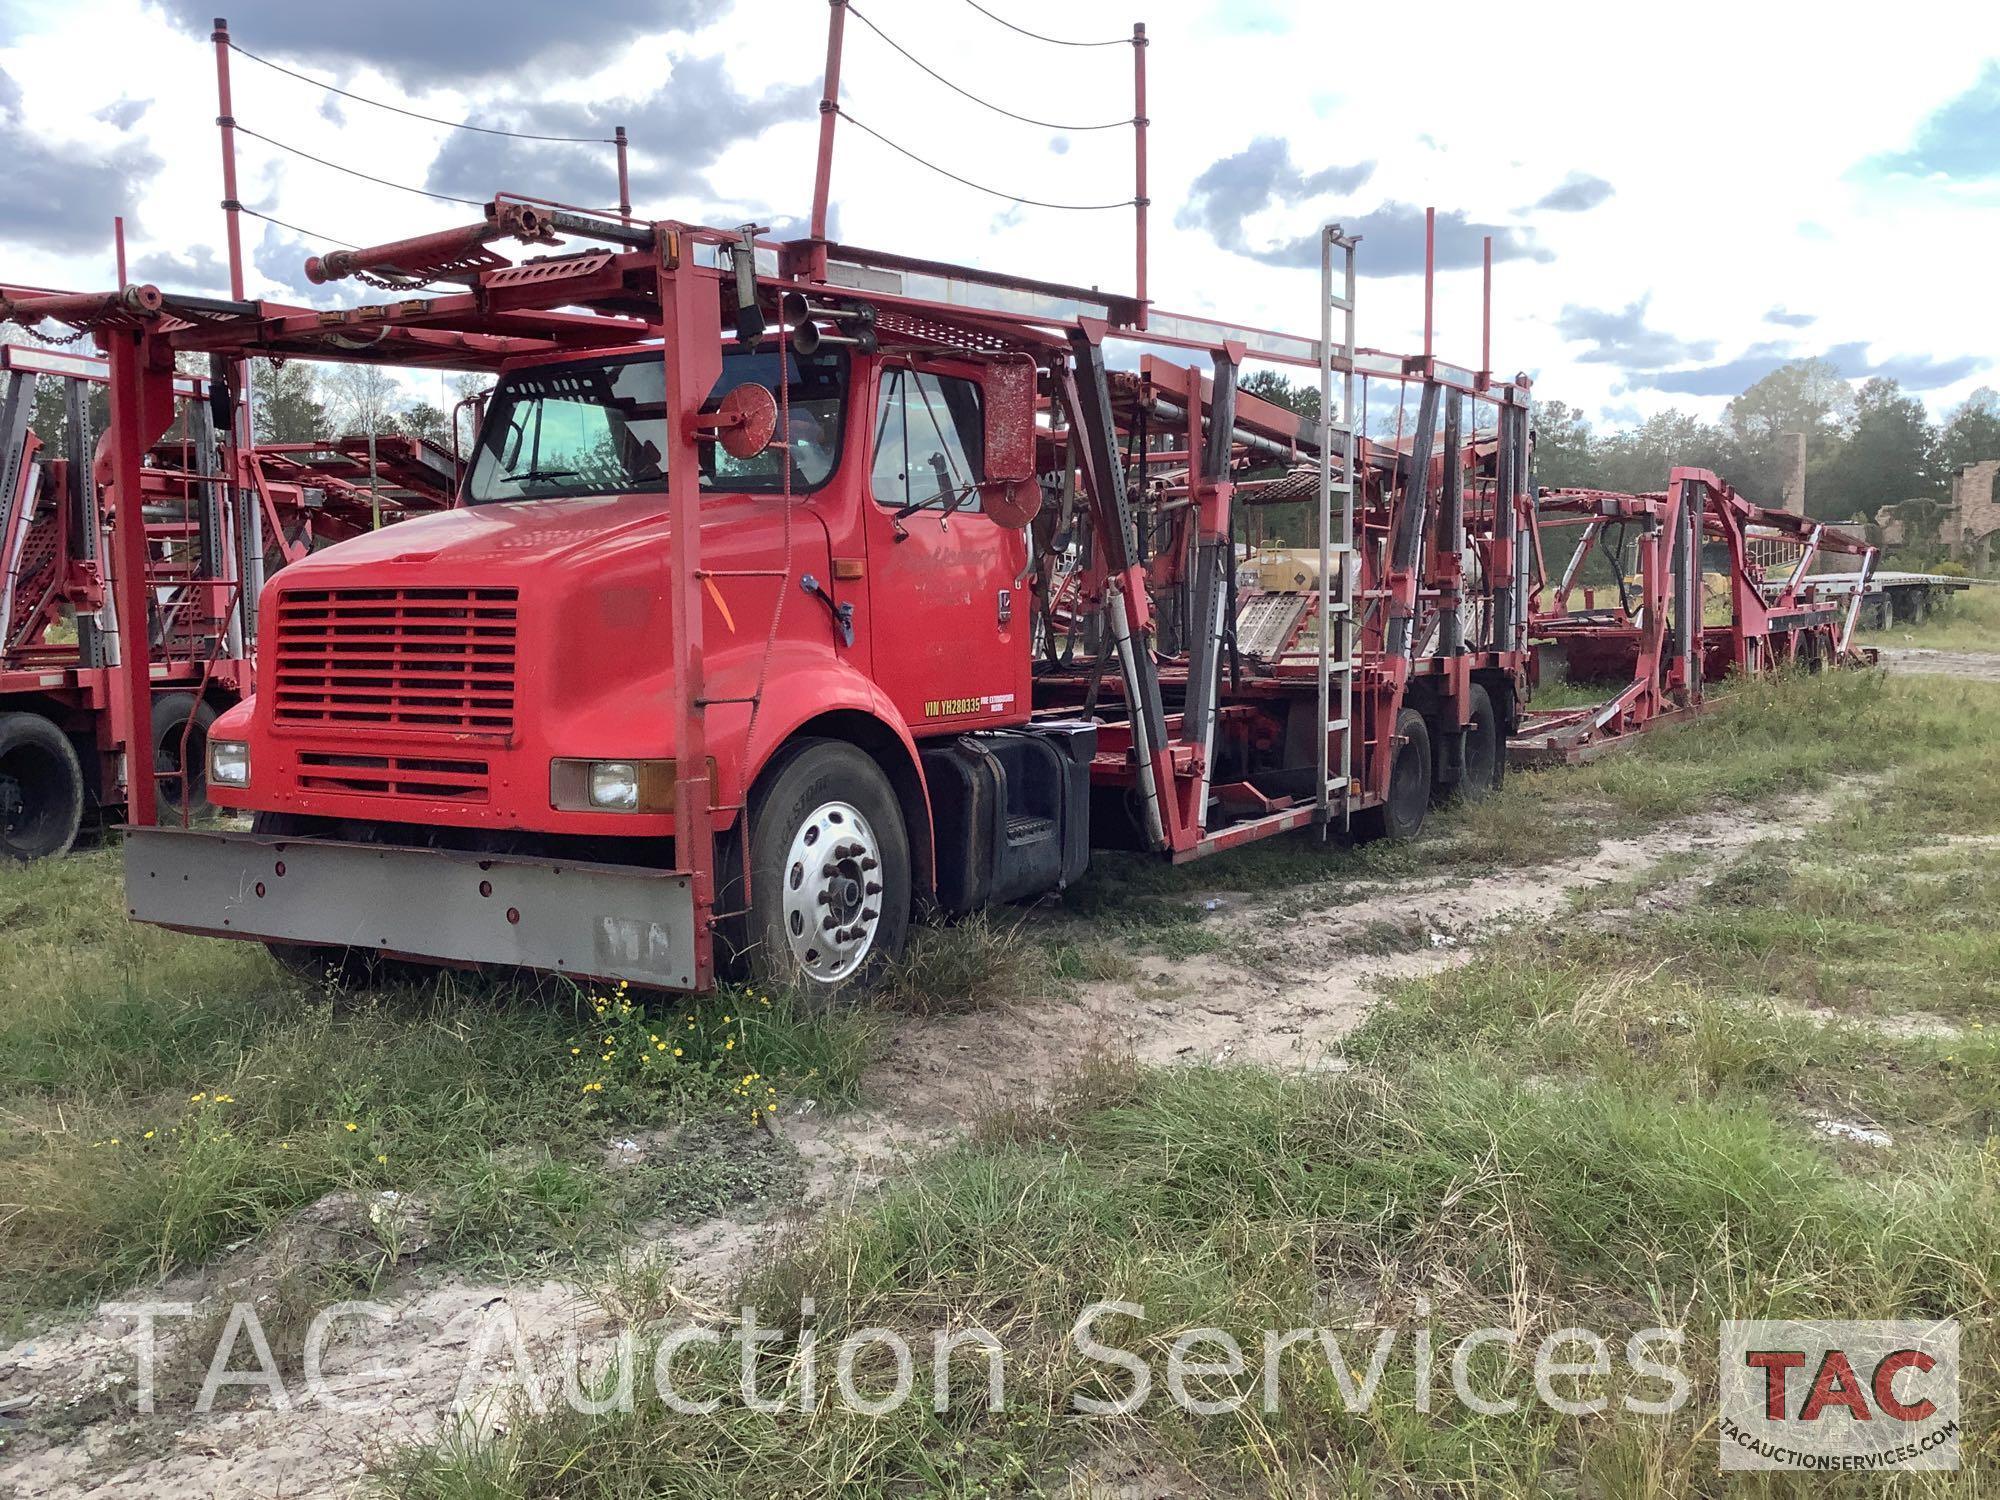 2000 International 8100 CH 6x4 With Cottrell C- 7512 Trailer